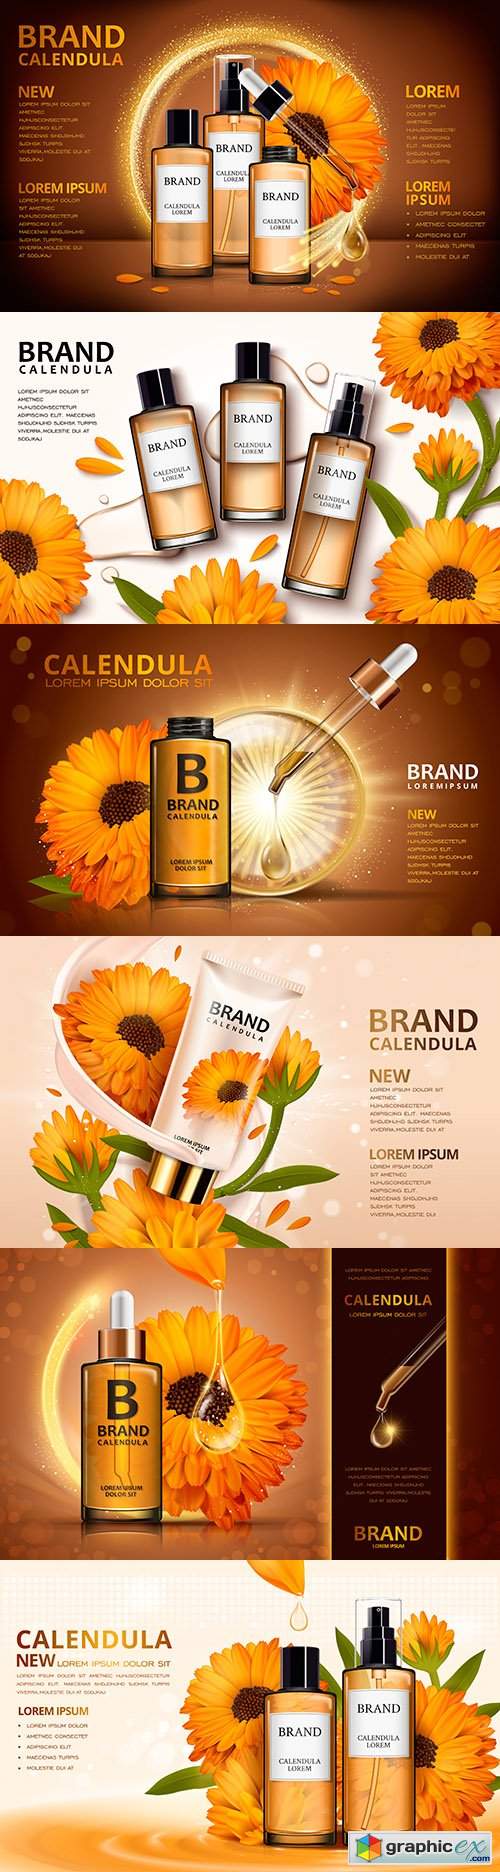  Design cosmetic advertising 3d illustrations with calendula colors 